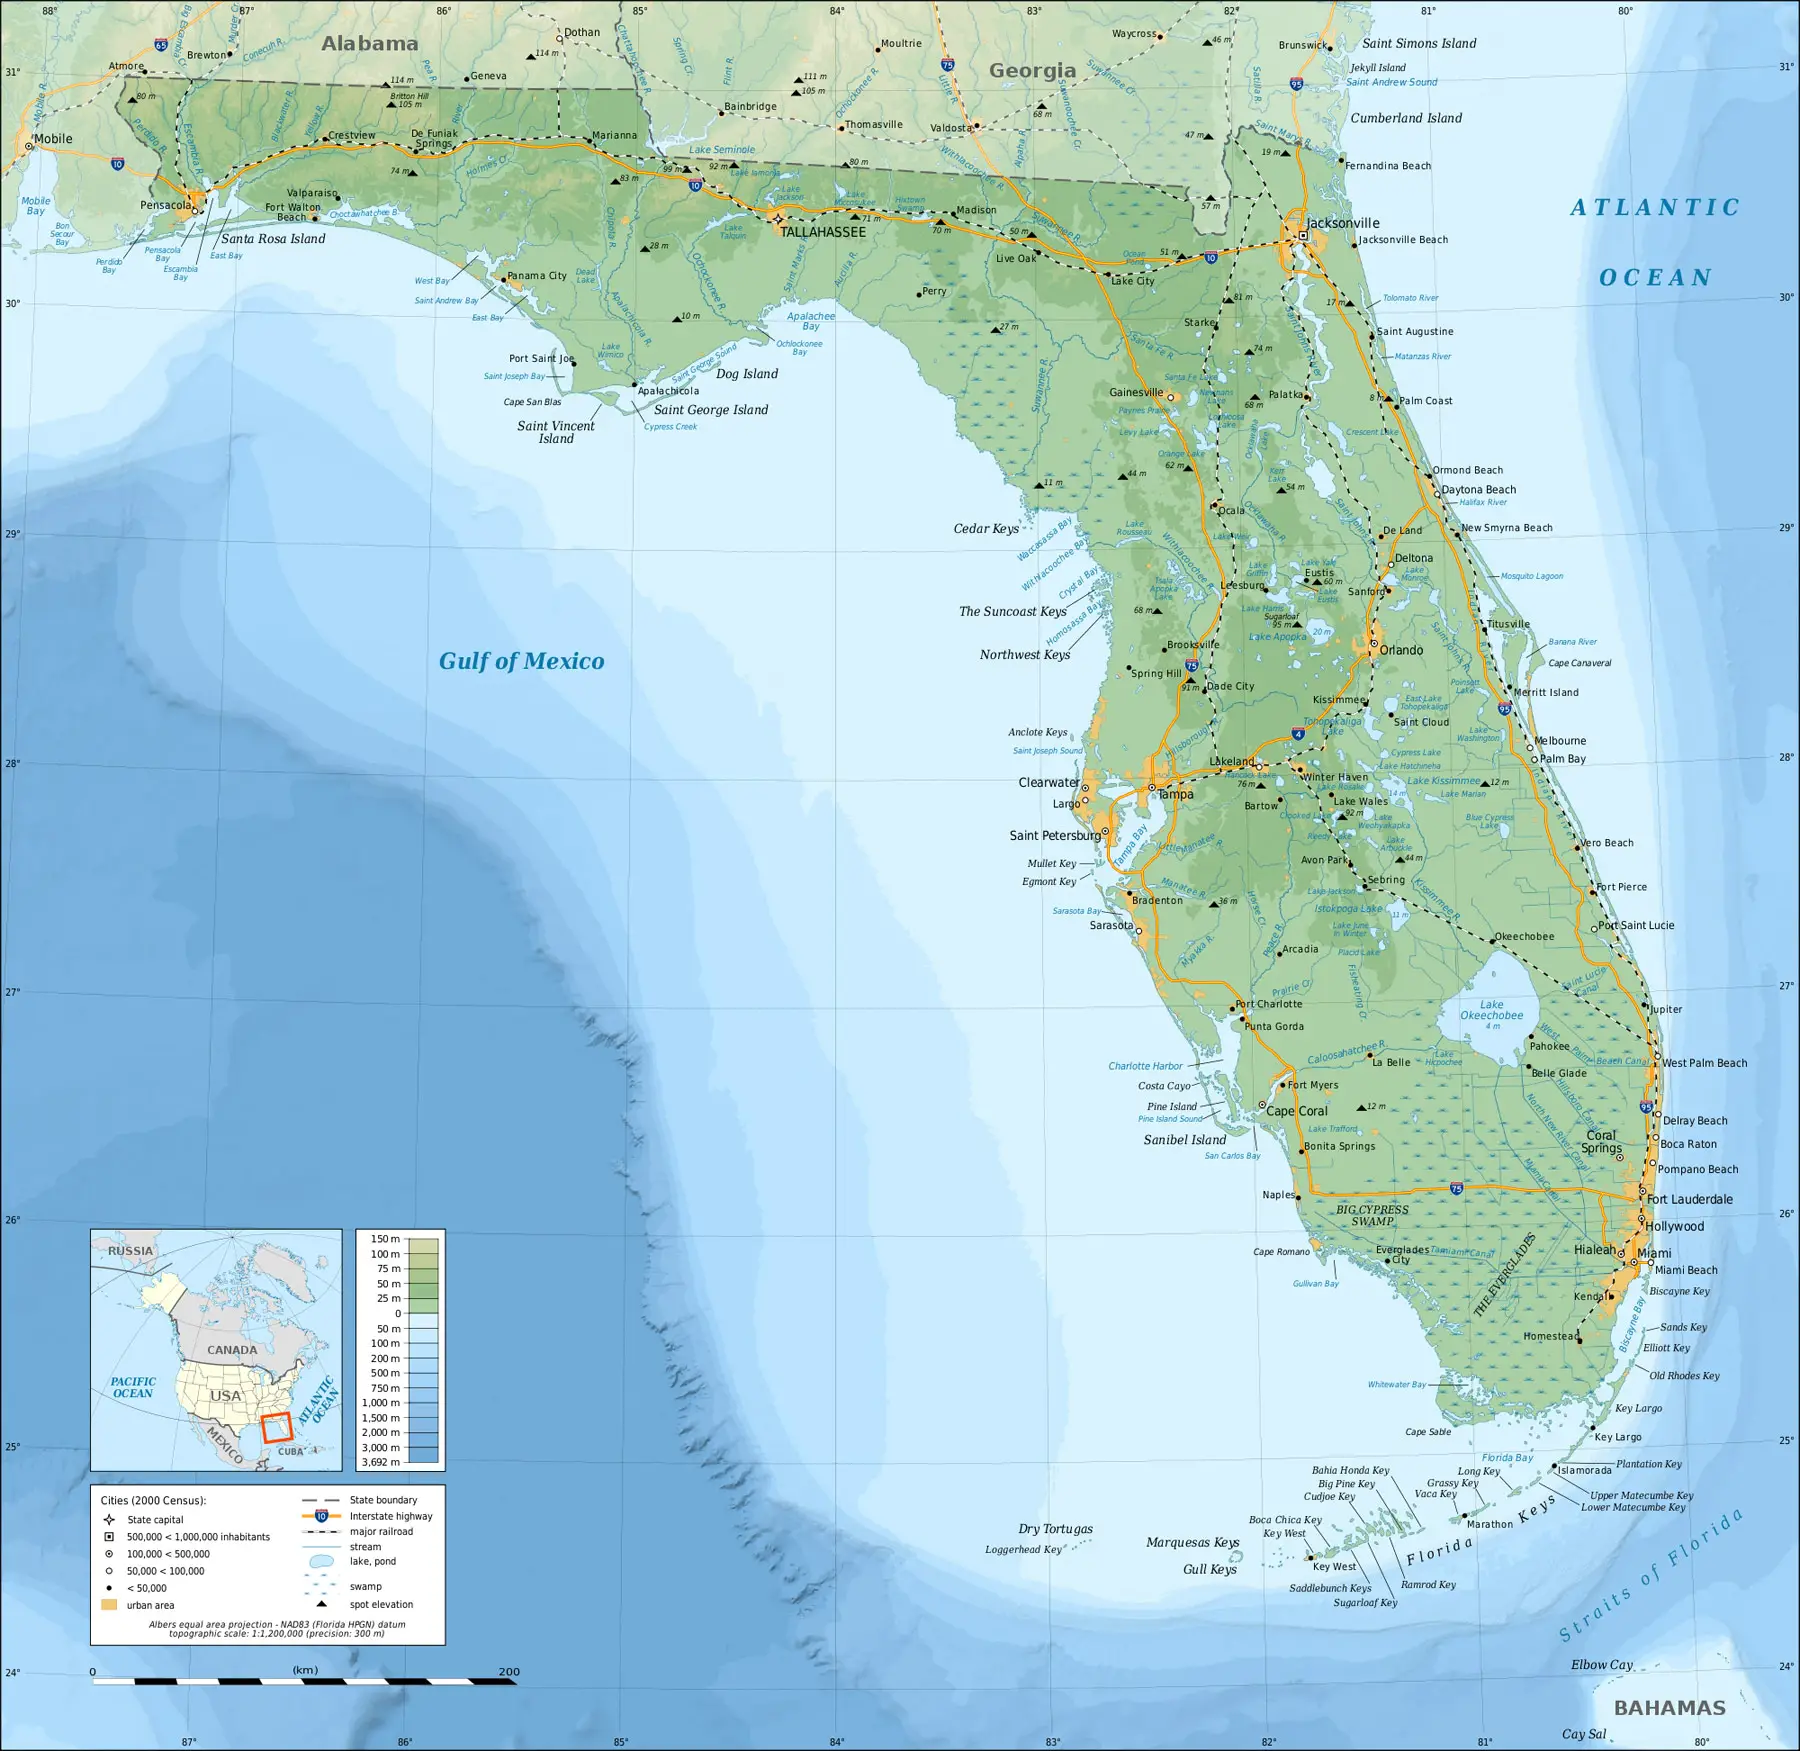 Florida maps. Click on the Florida Topographic Map to view it full screen